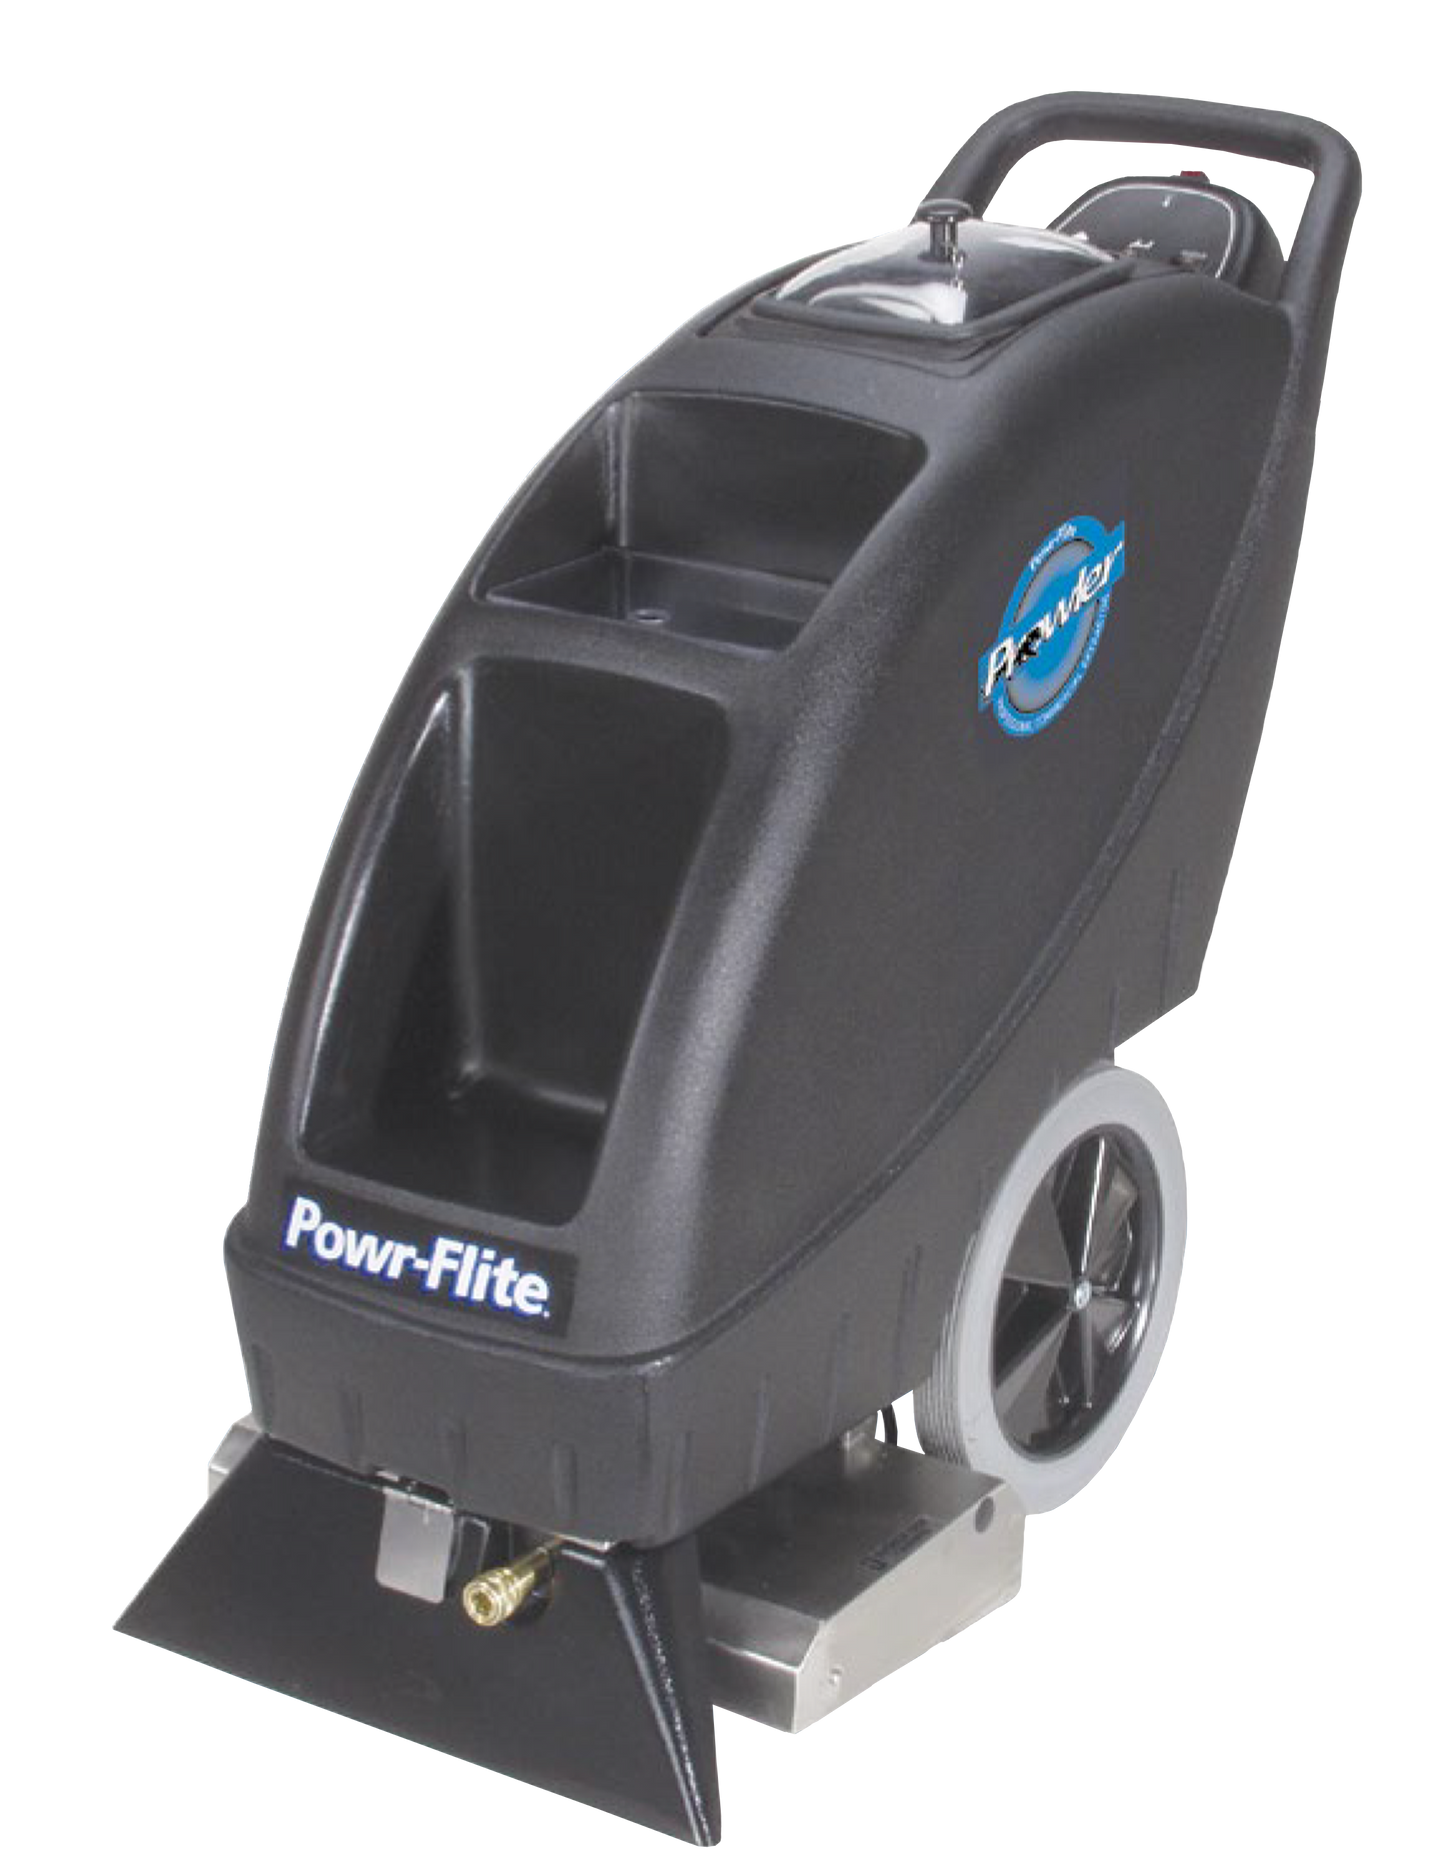 Powr-Flite Self-Contained Carpet Extractor 9 Gallon